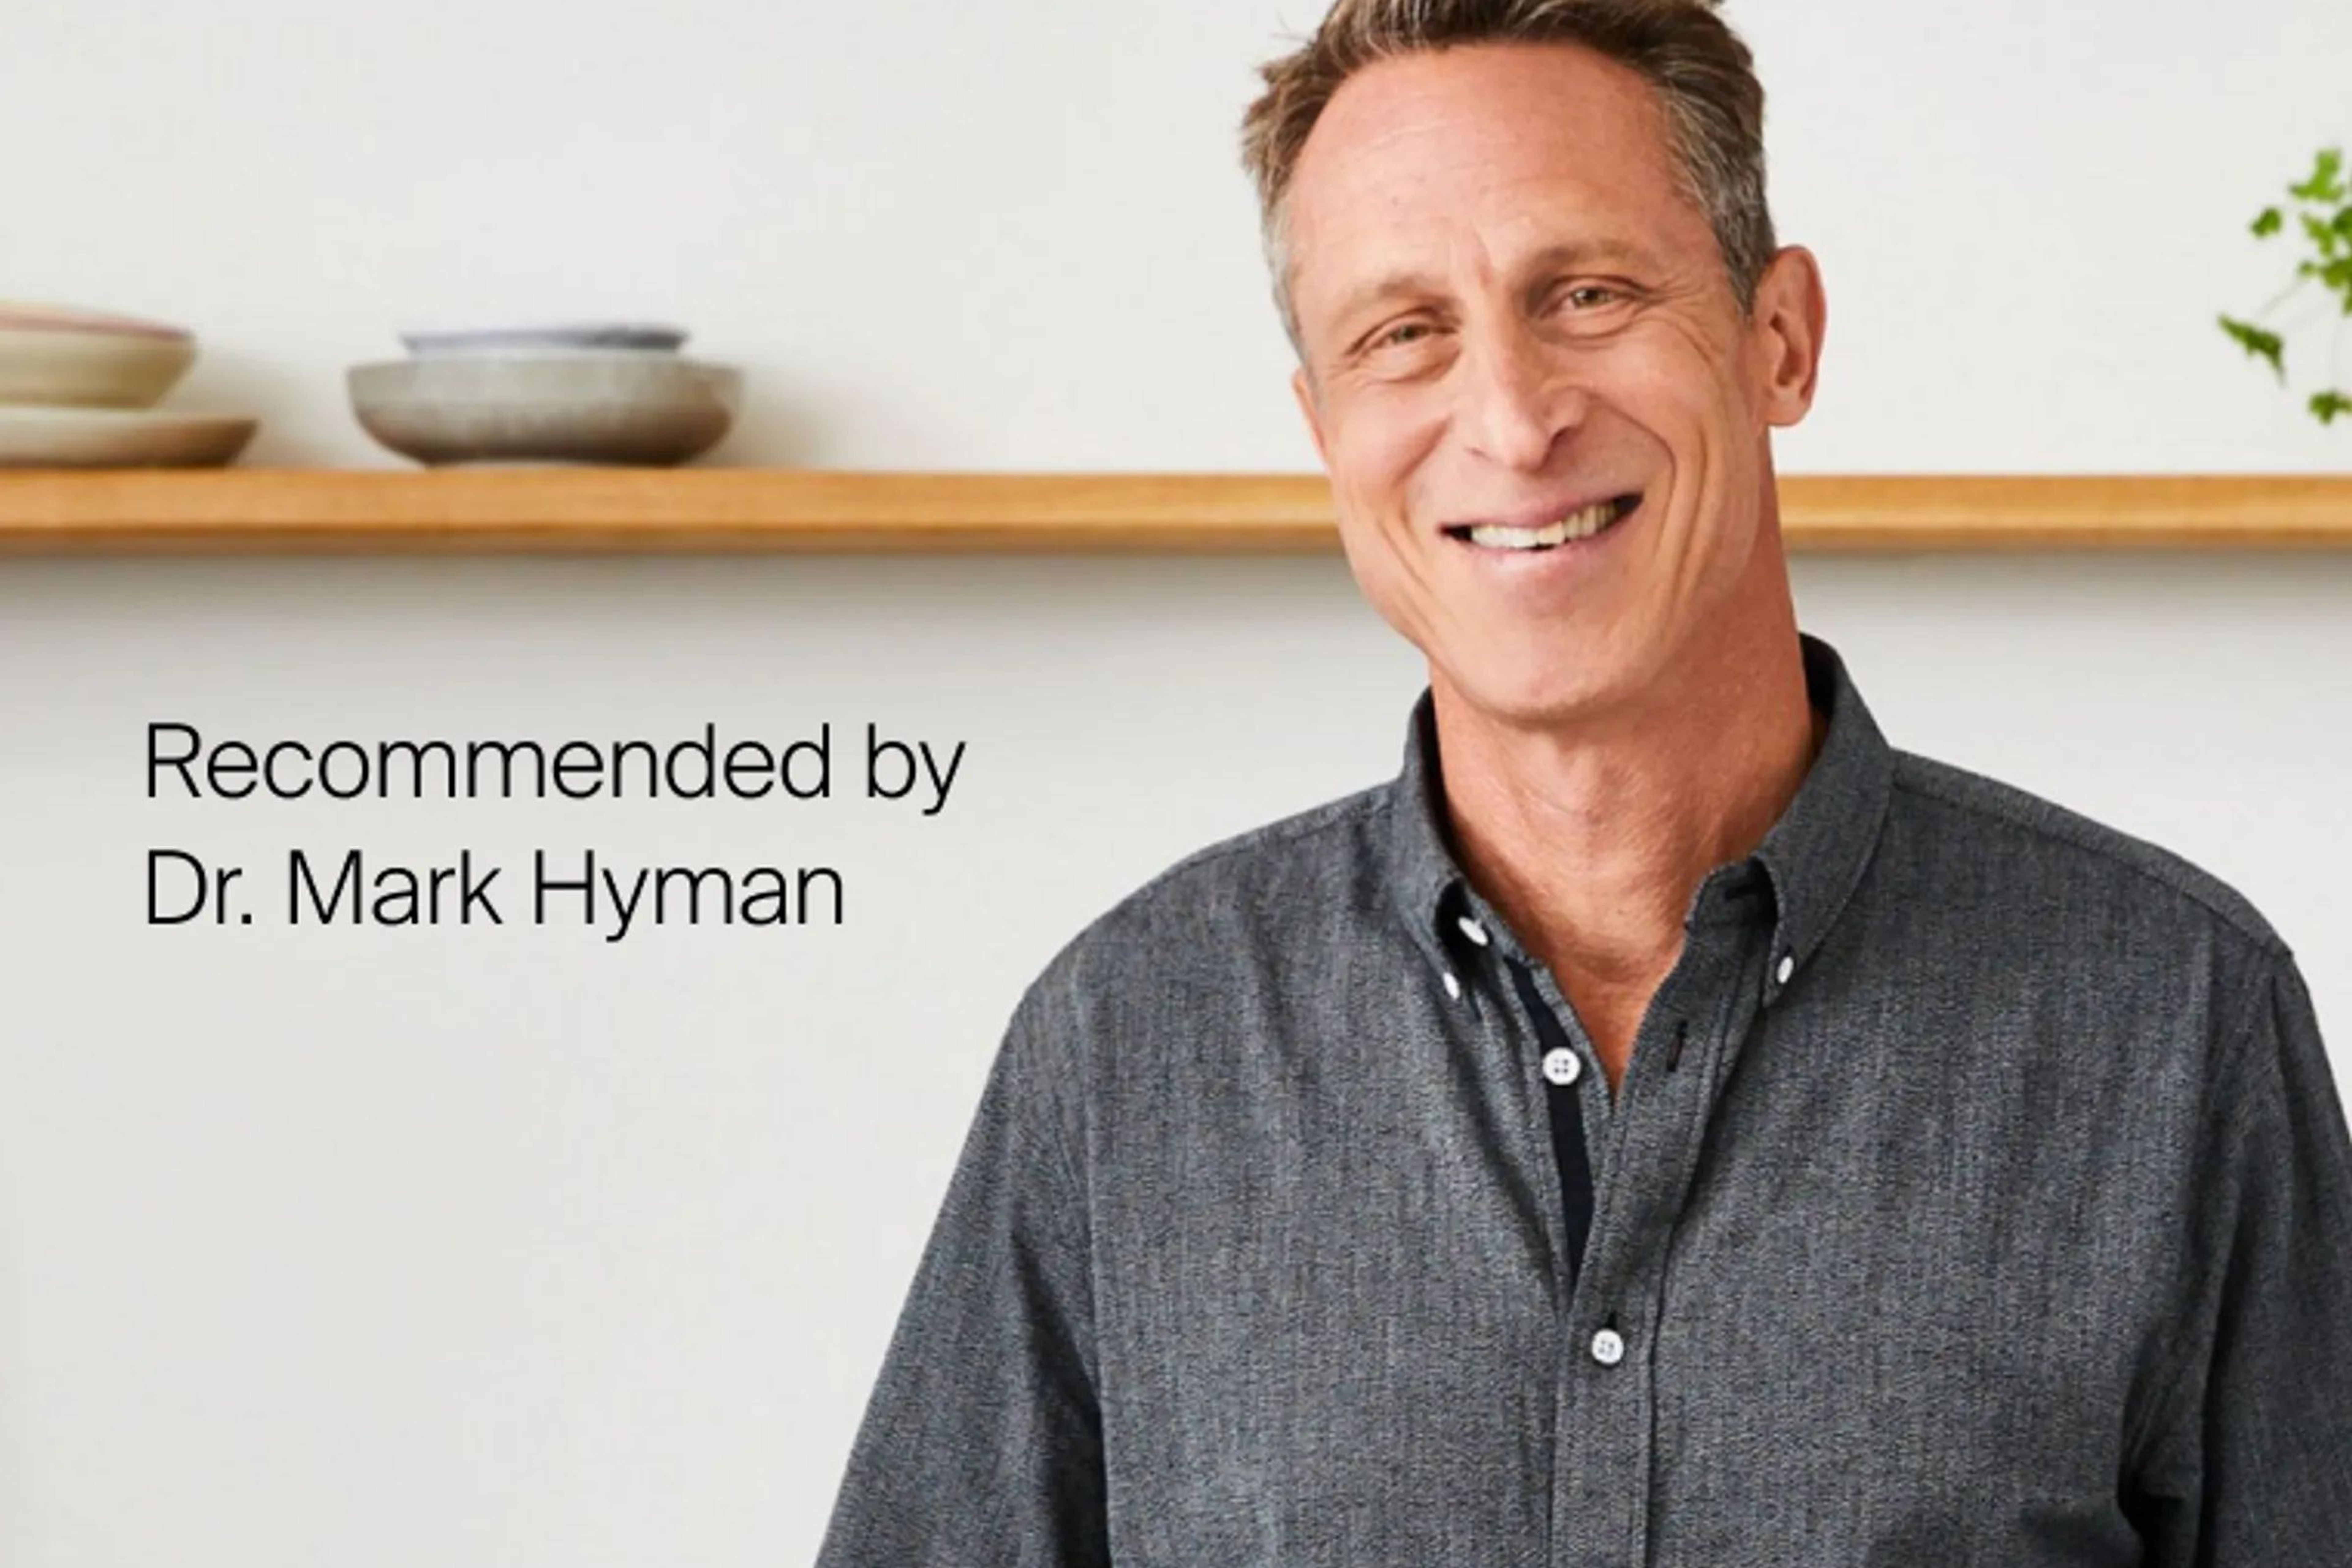 Recommended by Dr. Mark Hyman